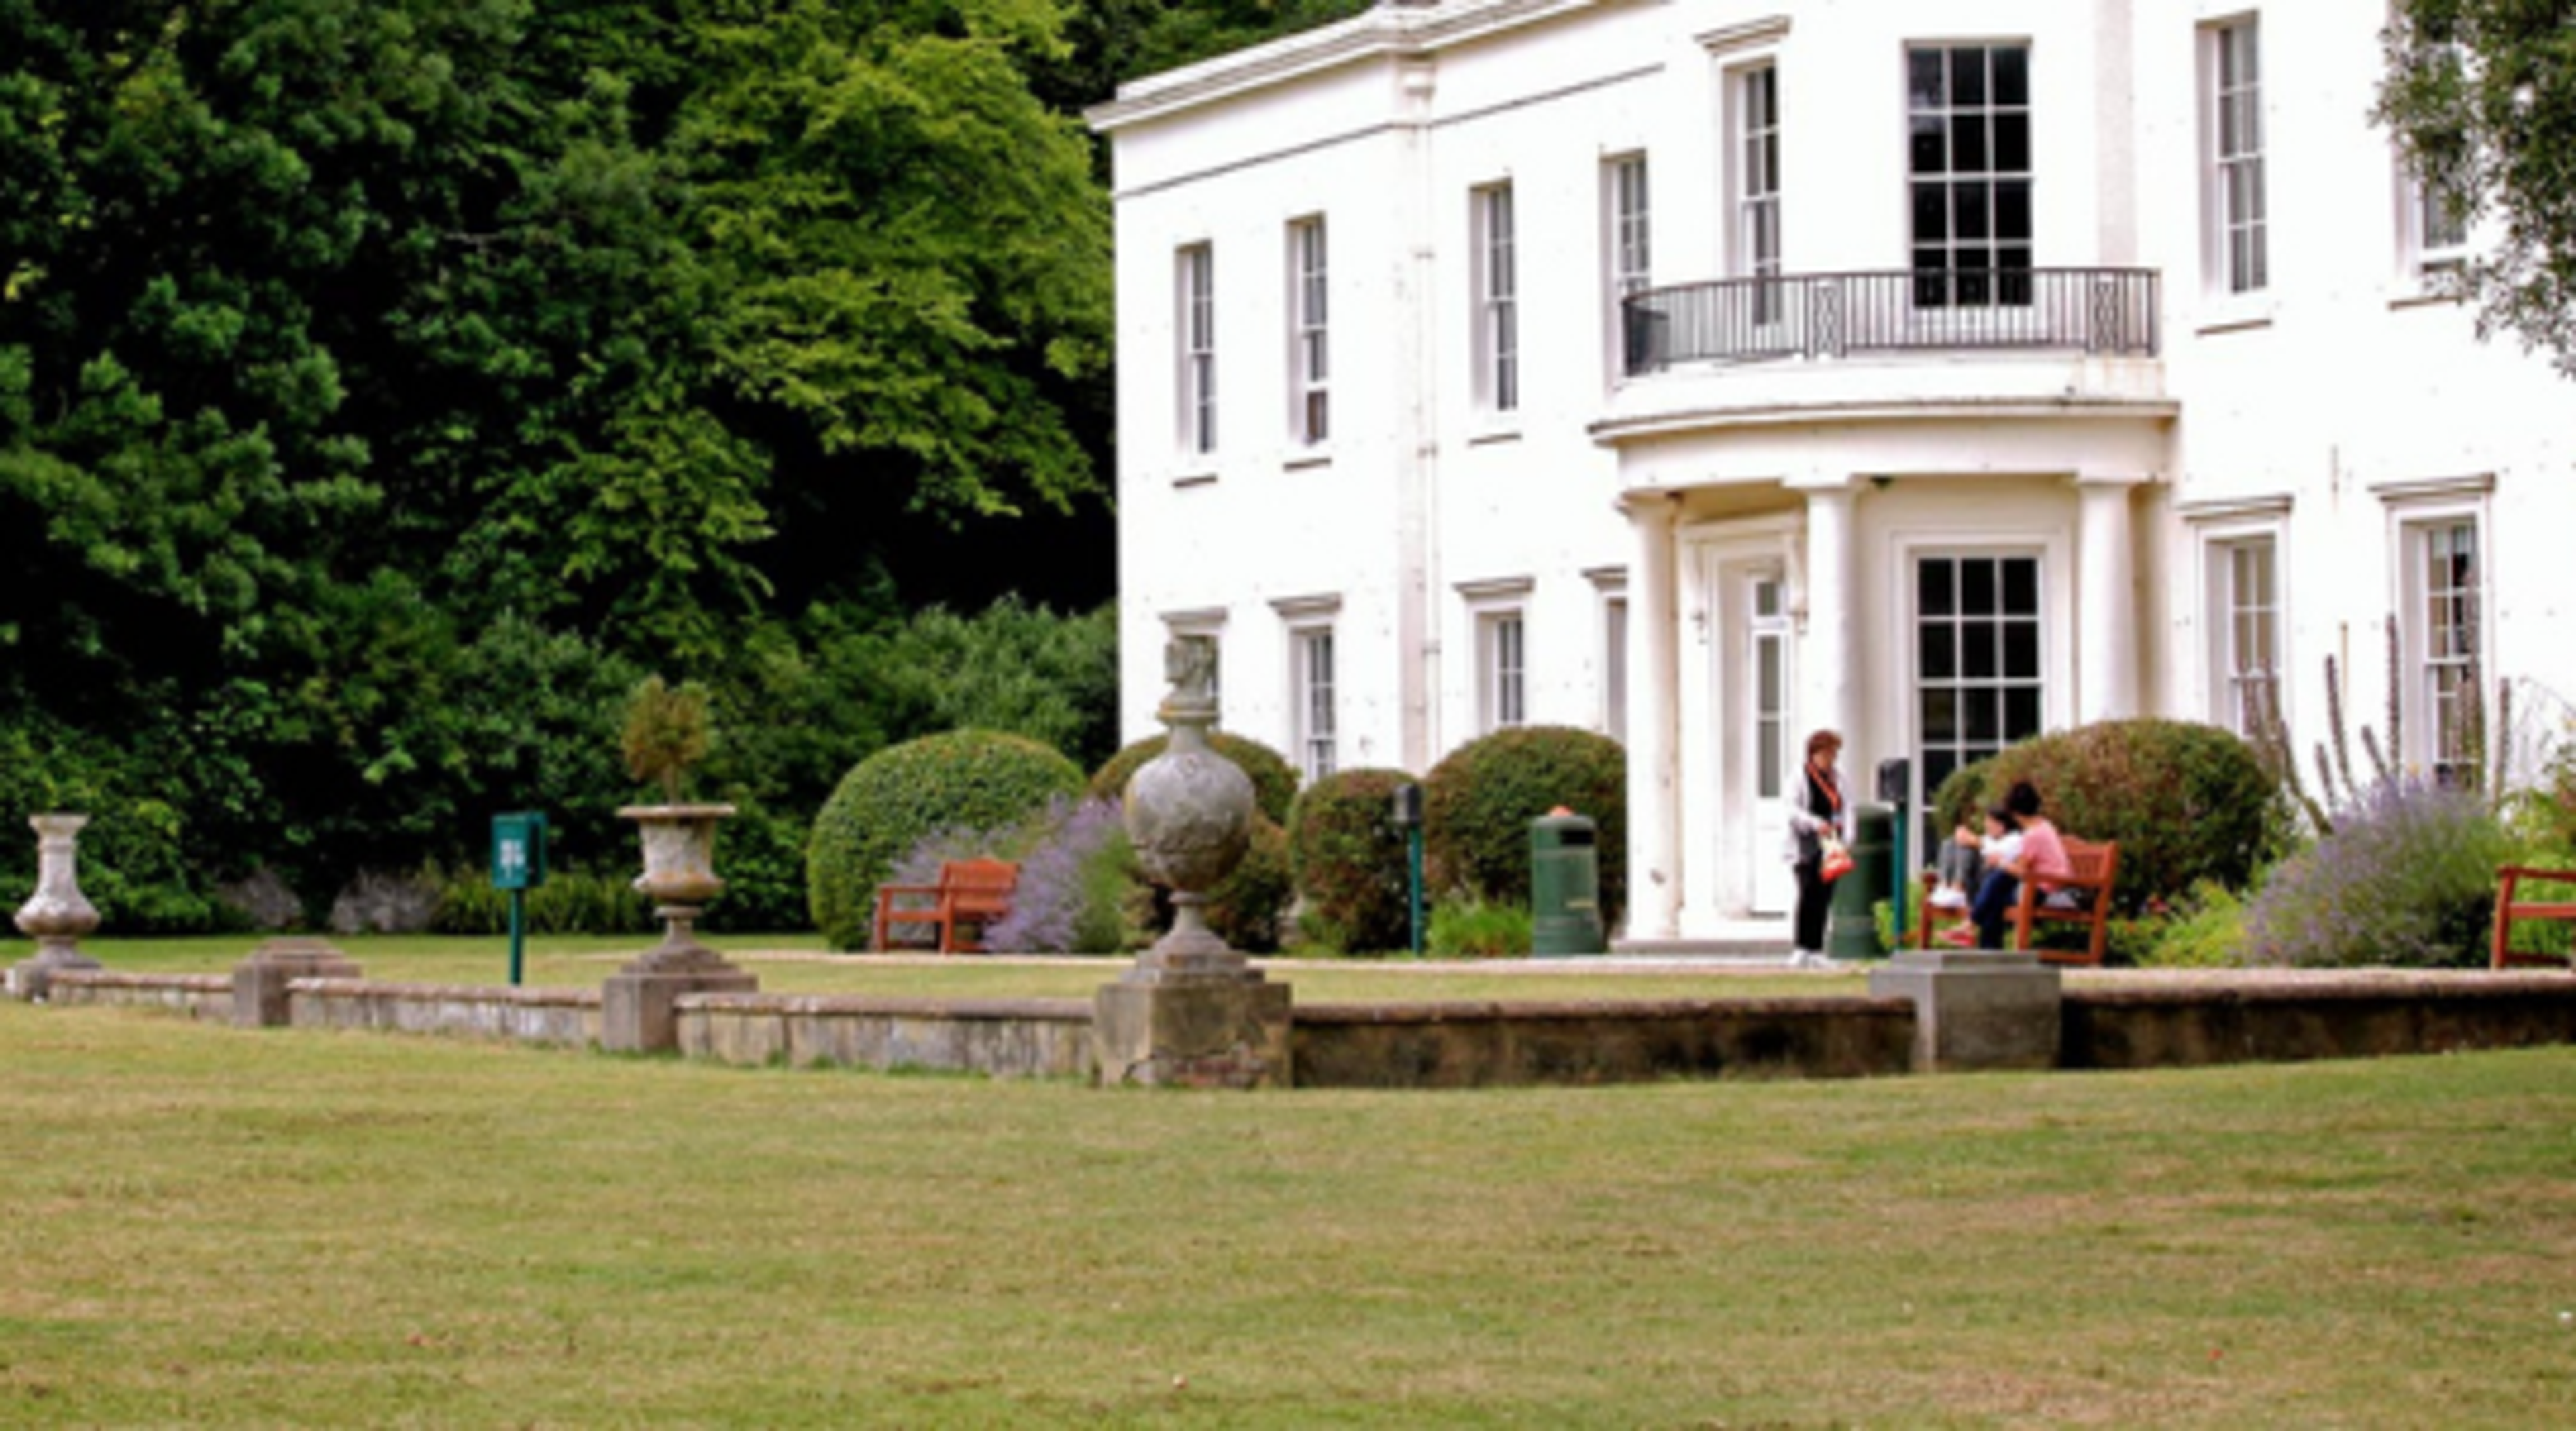 The historic Compton Place, home of our Eastbourne summer school